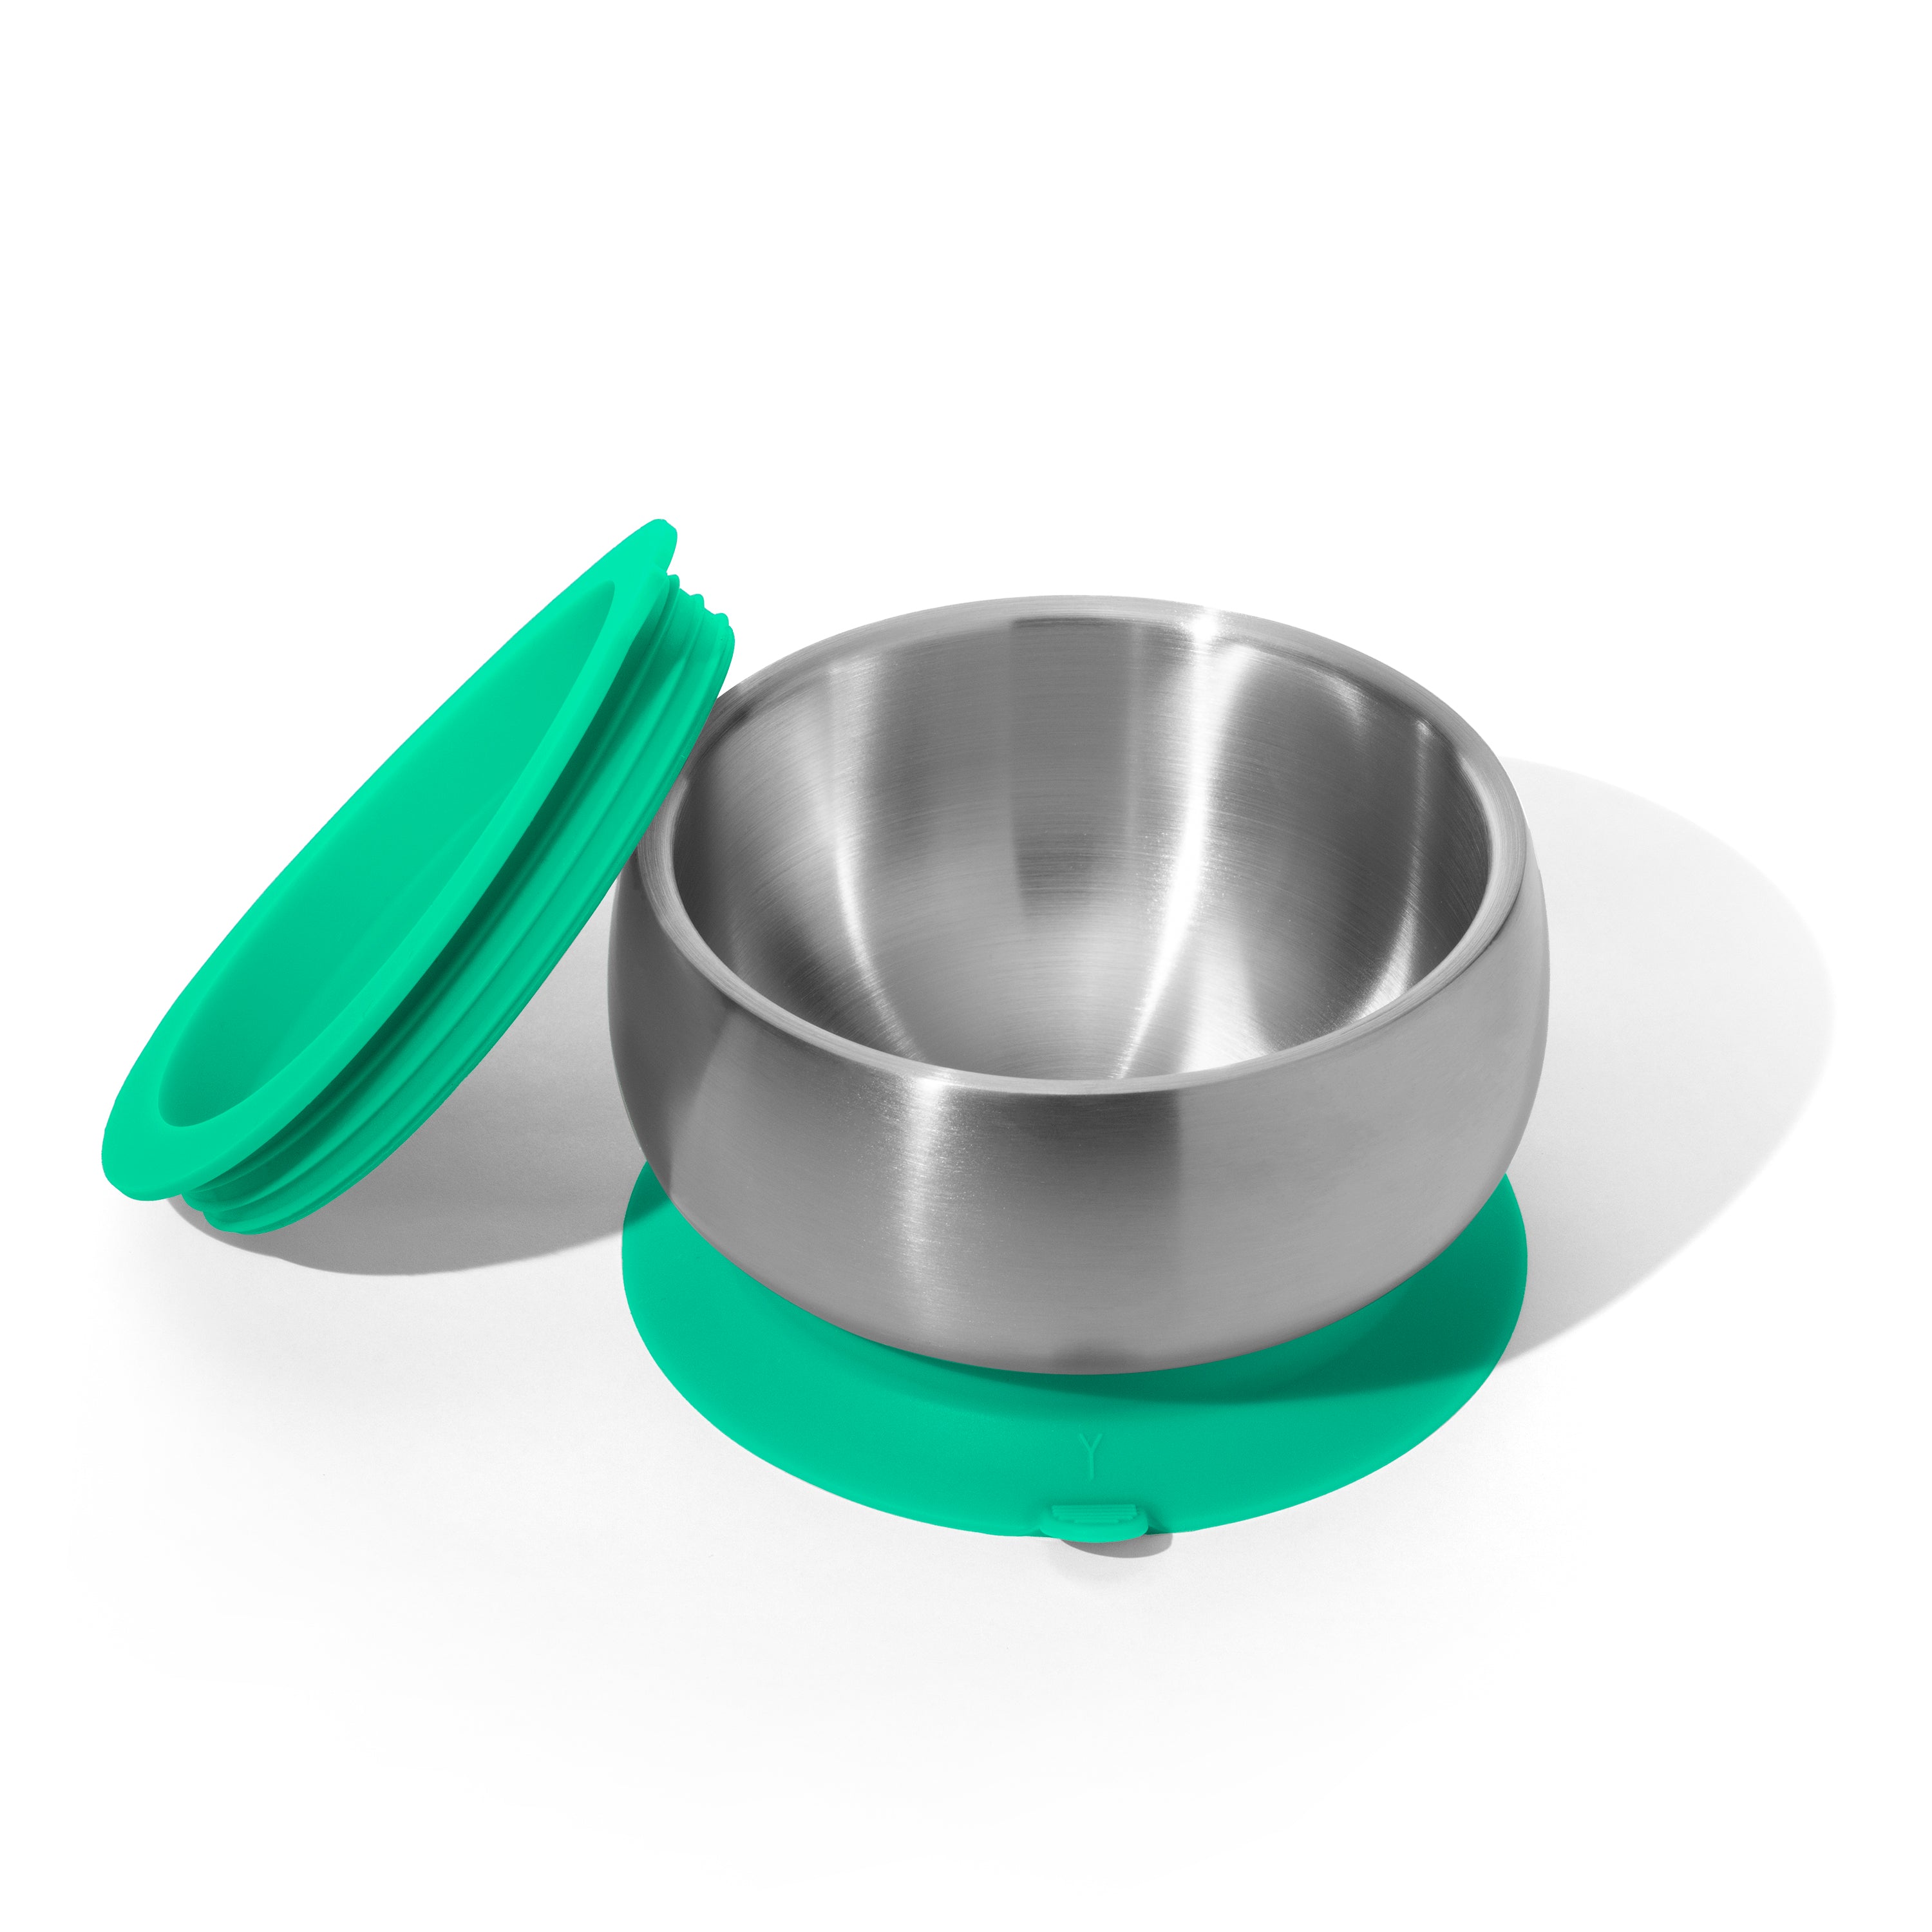 Avanchy Stainless Steel Baby Bowl With Lid - Green